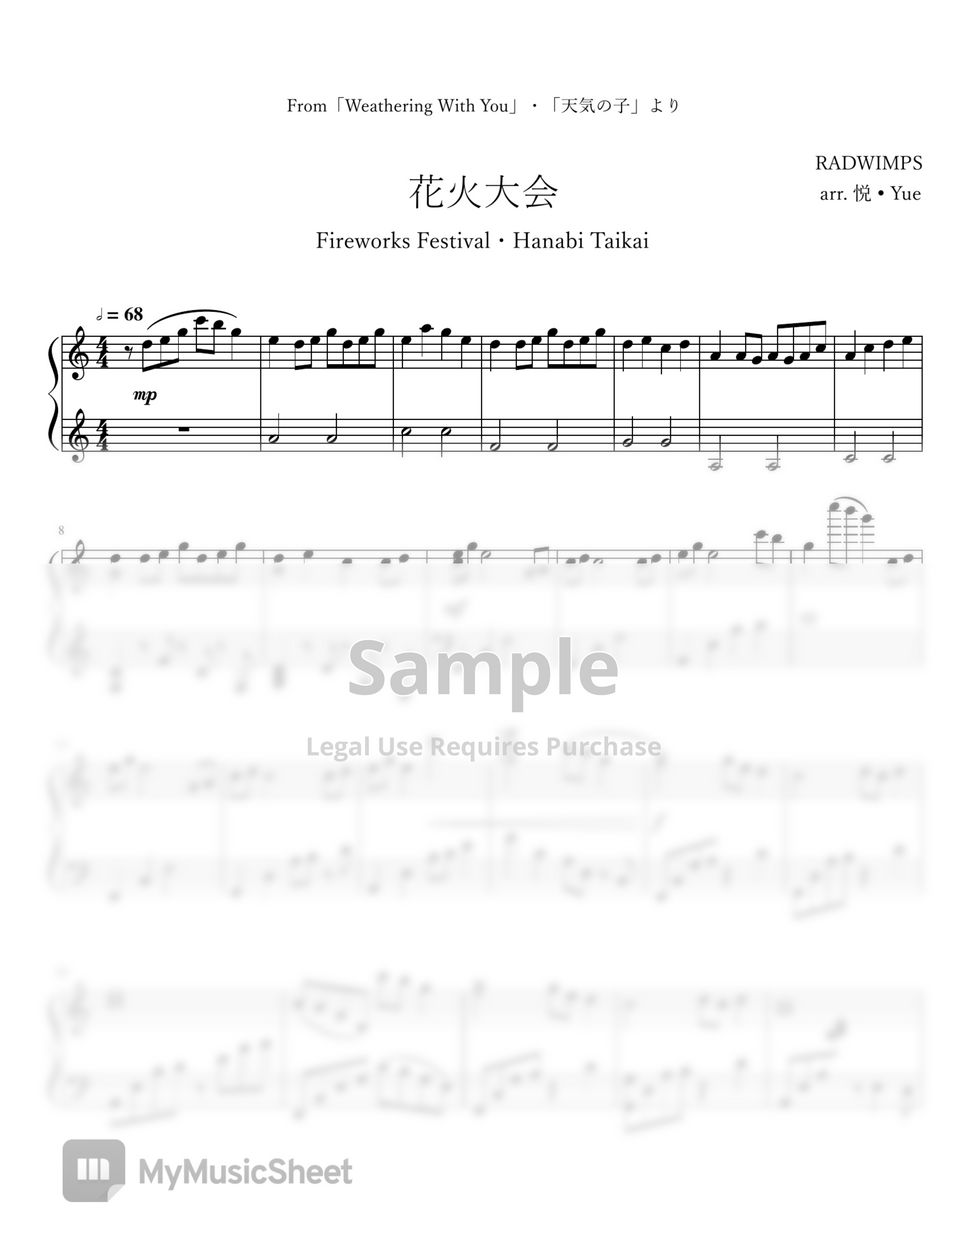 Weathering With You / 天気の子 - Weathering With You「Fireworks Festival / 花火大会」Piano (Arrangement) by 悦 • Yue